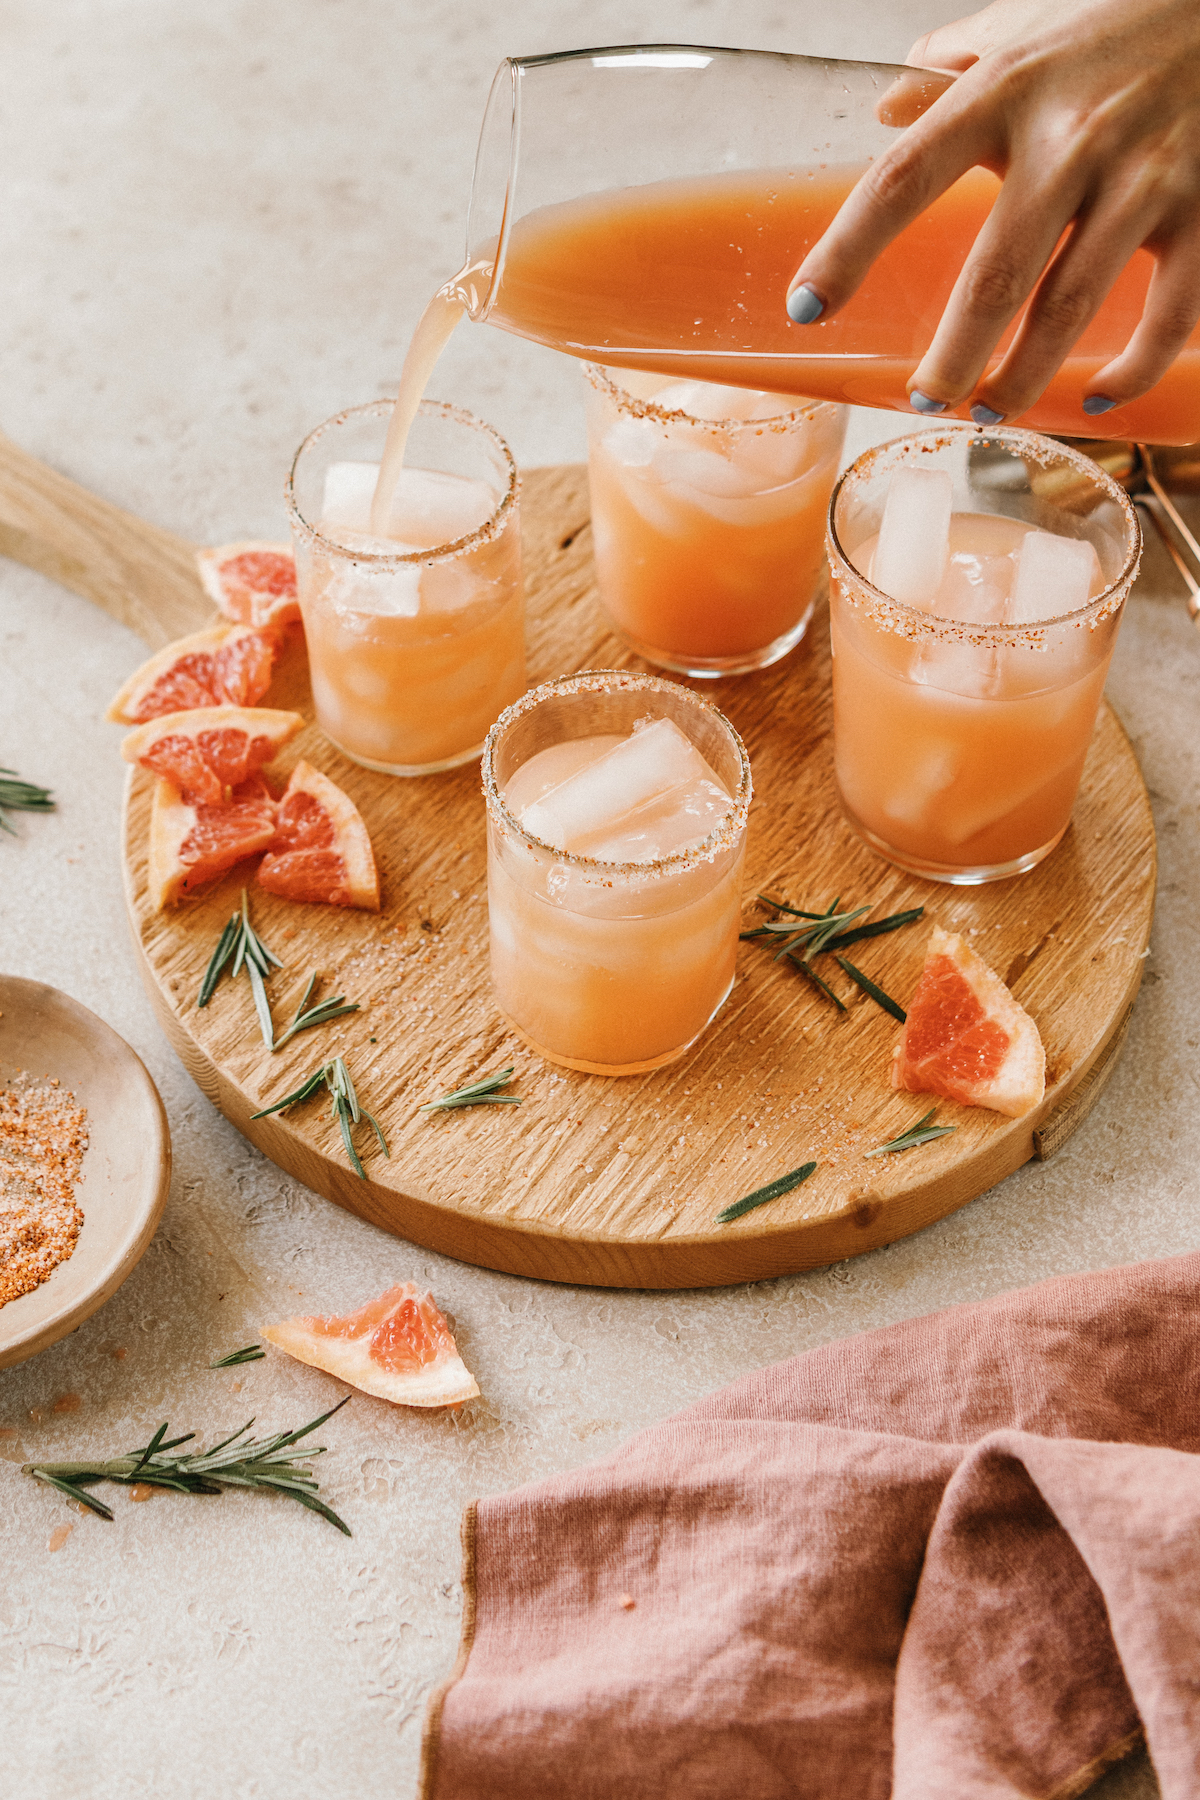 This Spicy Mezcal Paloma Recipe Will Heat Up Your Summer